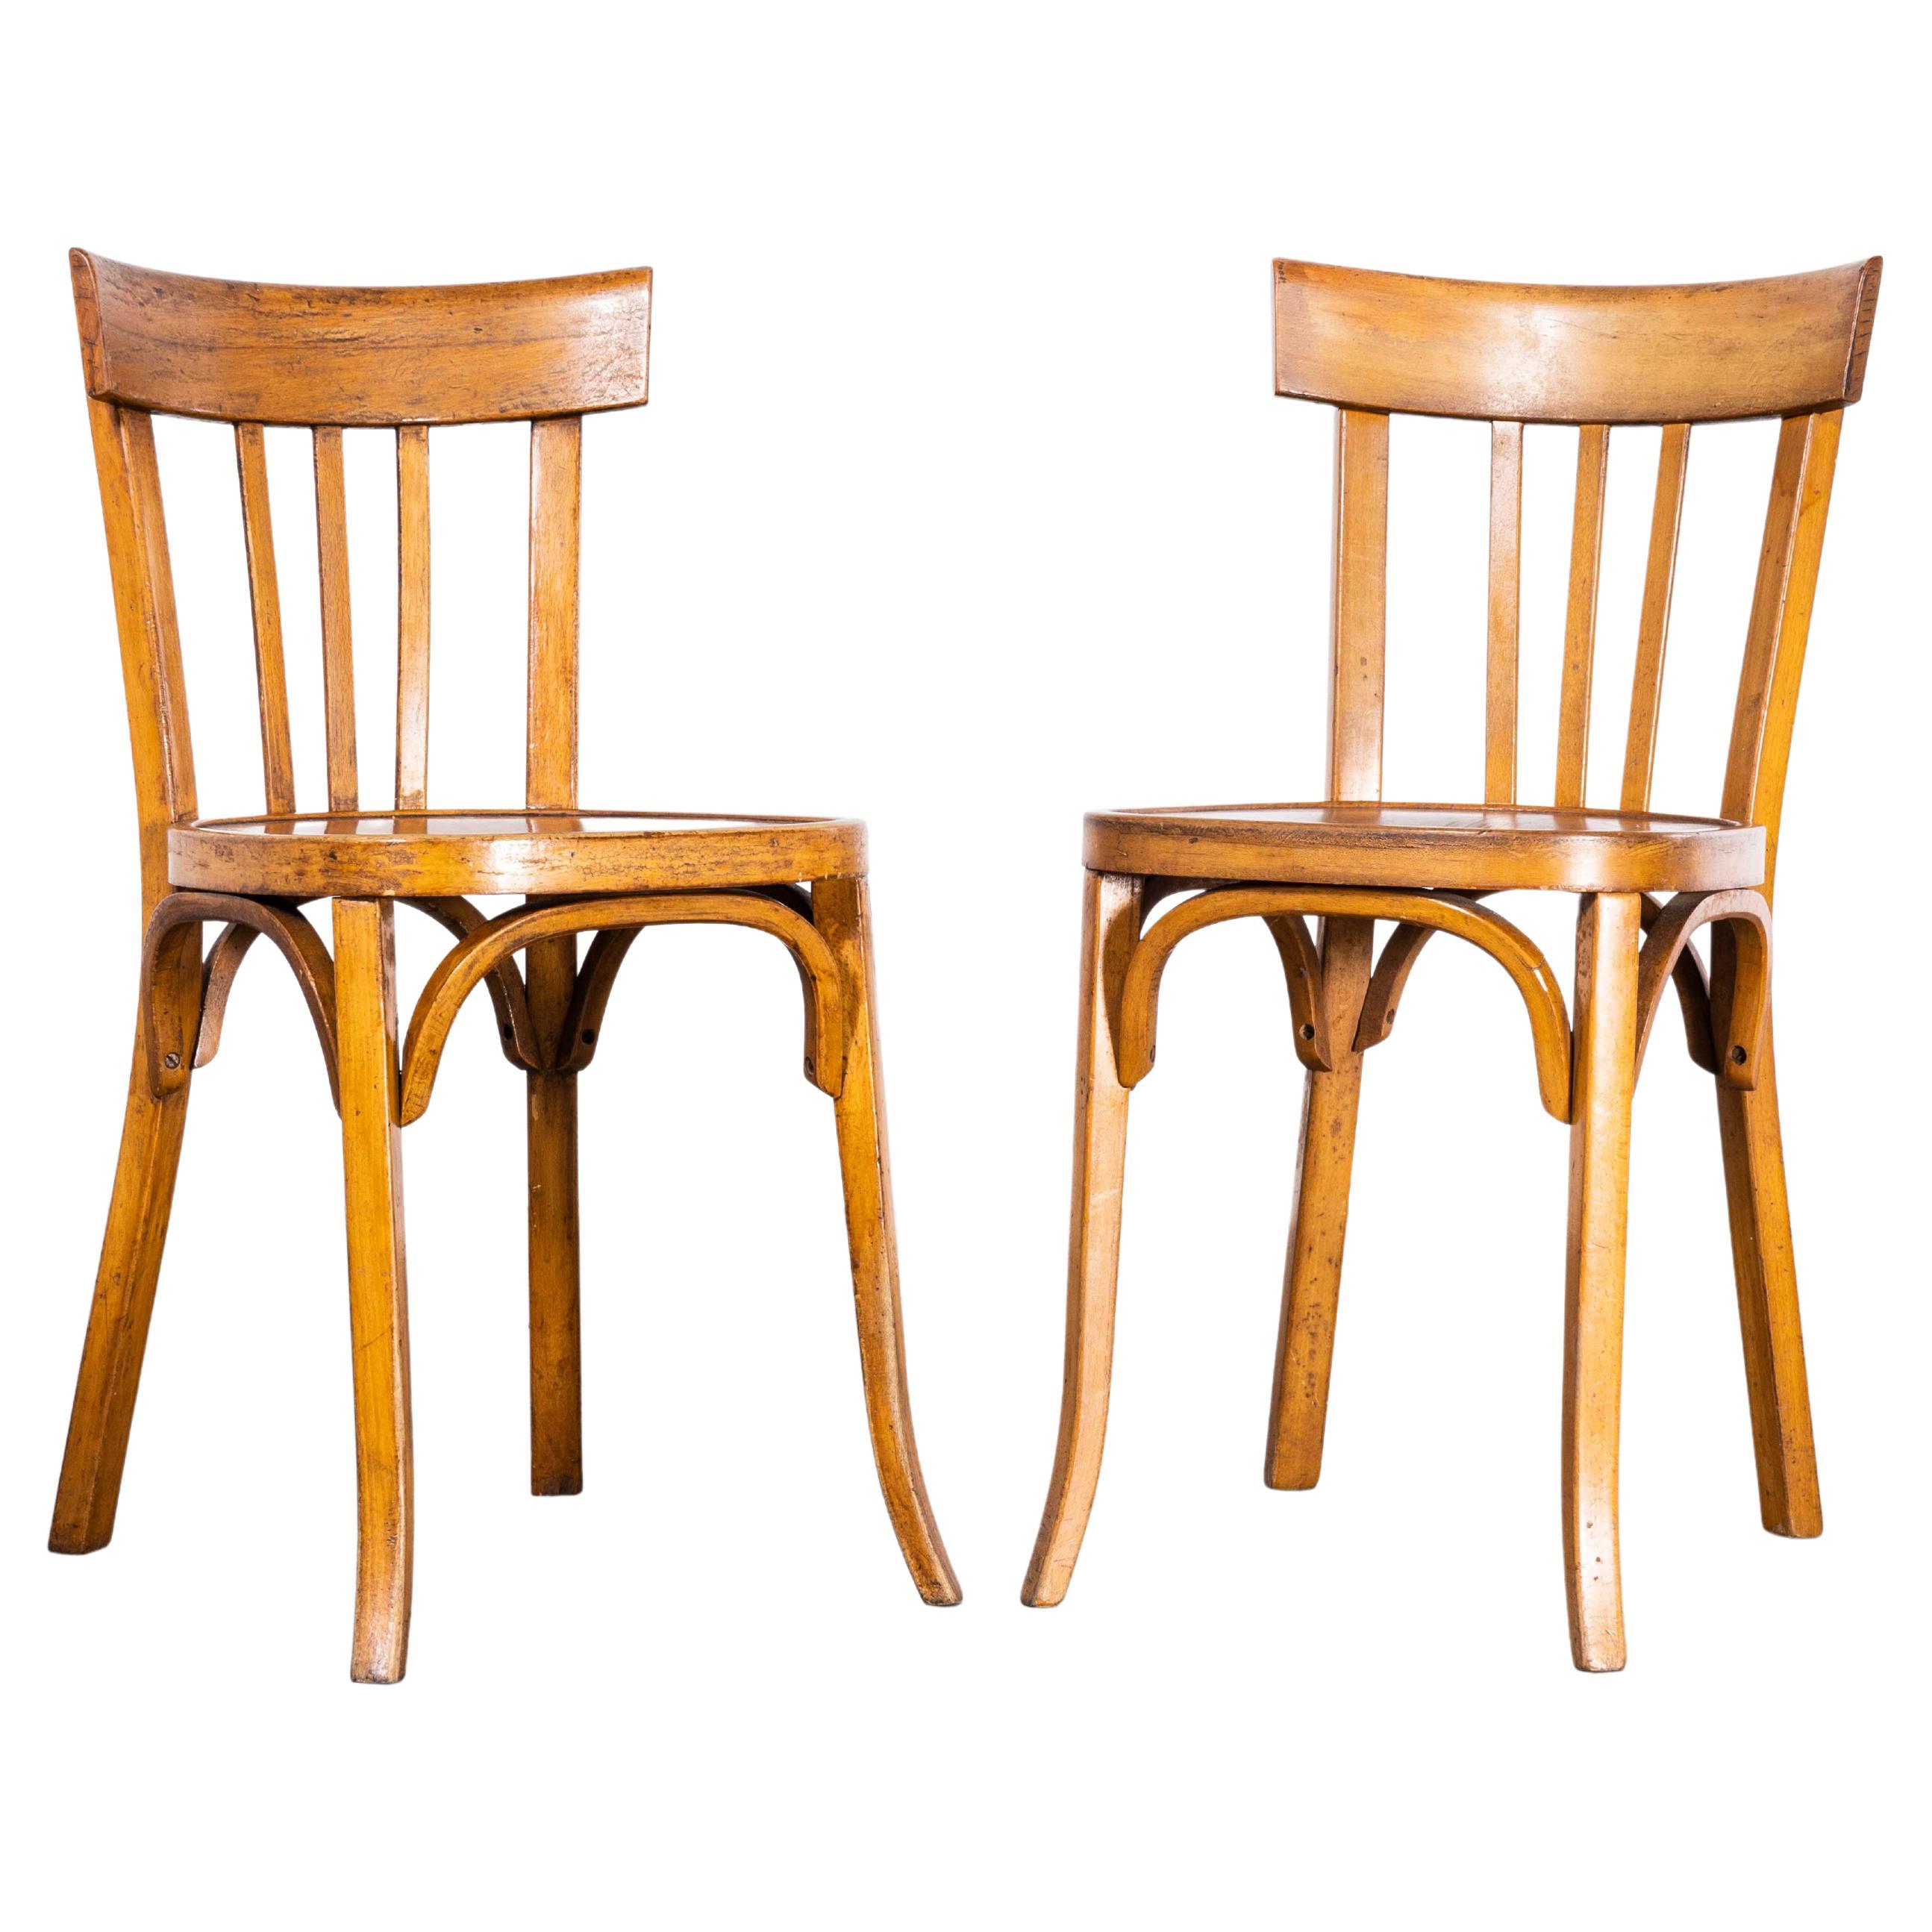 1950s Luterma Warm Oak Bentwood Dining Chair - Pair For Sale